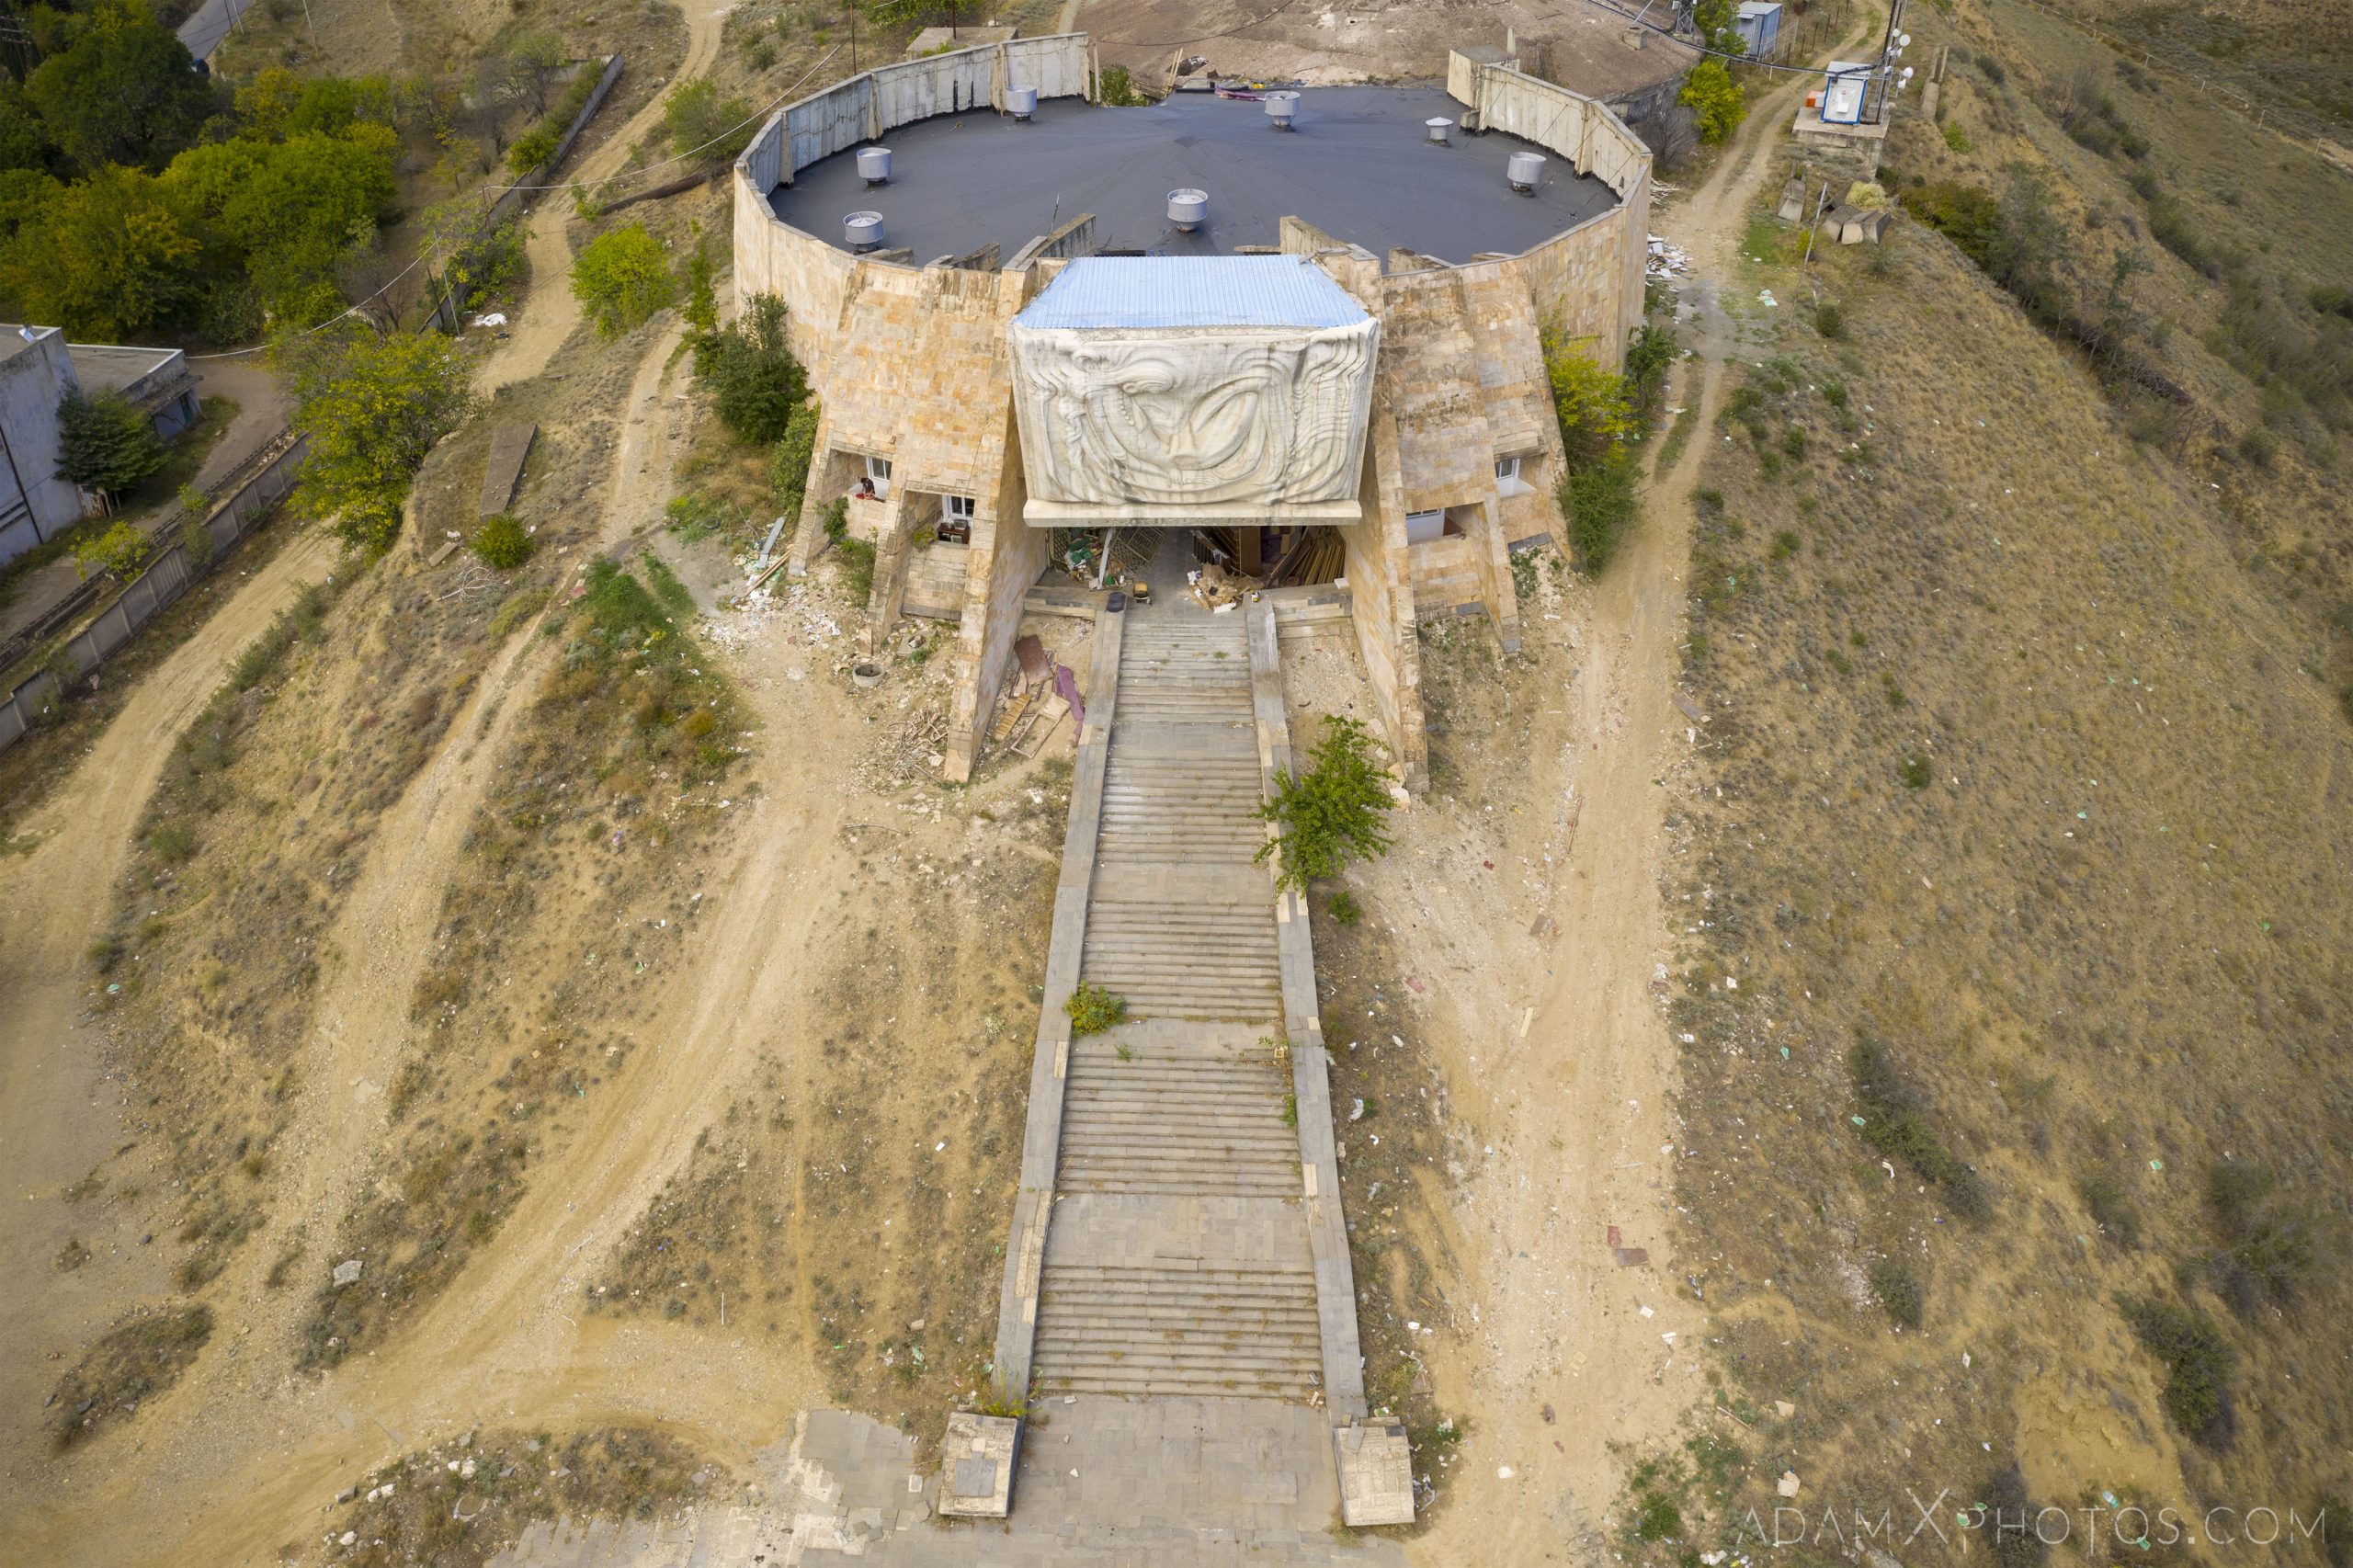 Drone Aerial from above Front entrance Soviet Monument Archeological Museum Tbilisi Georgia Soviet era Adam X Urbex Urban Exploration 2018 Abandoned Access History decay ruins lost forgotten derelict location creepy haunting eerie security